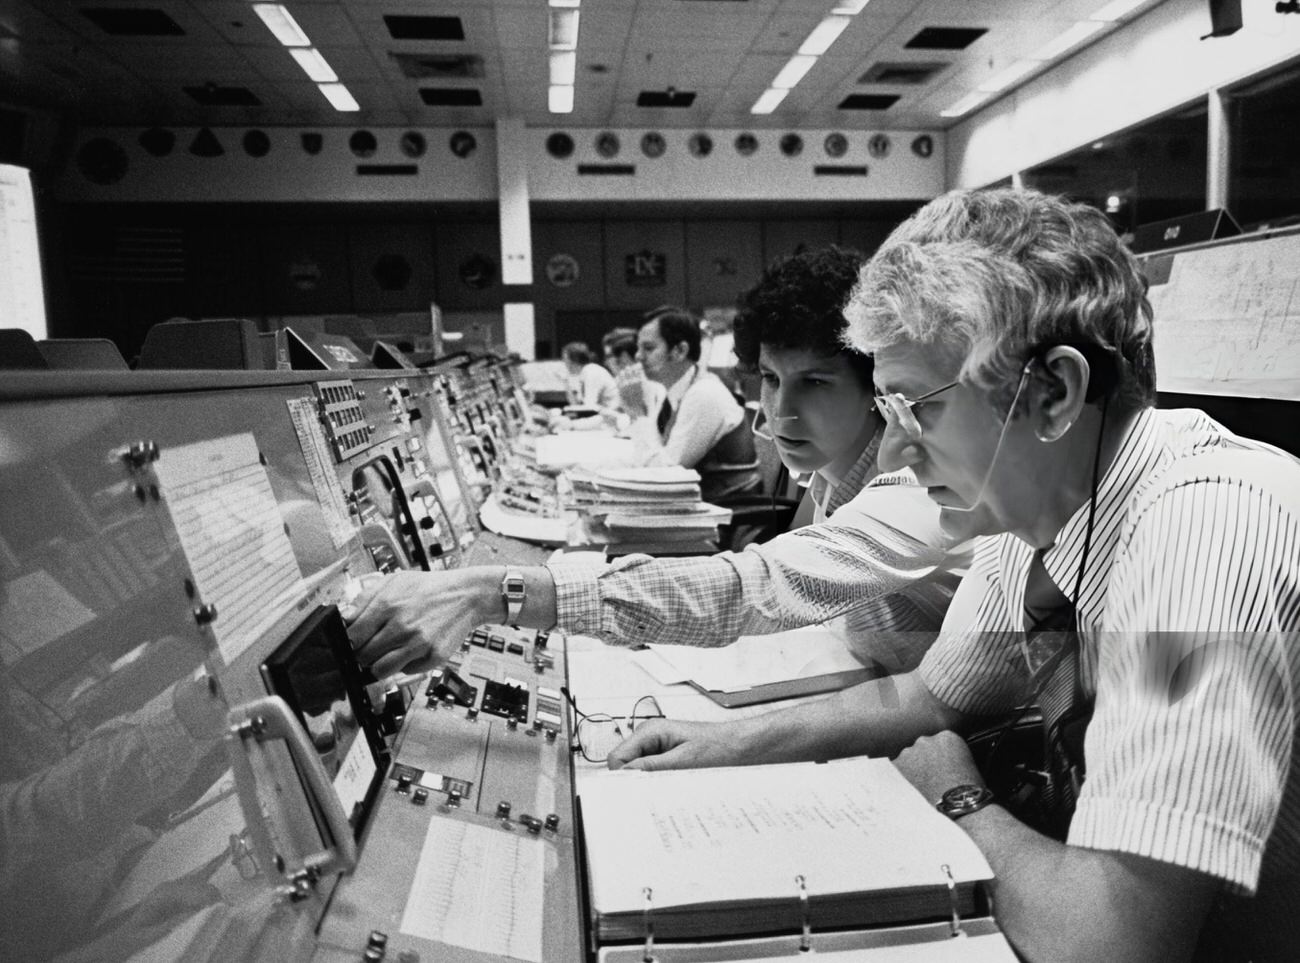 Astronauts Henry W. Hartsfield and Ellen S. Baker in mission control during STS-3, Houston, Texas, 1982.